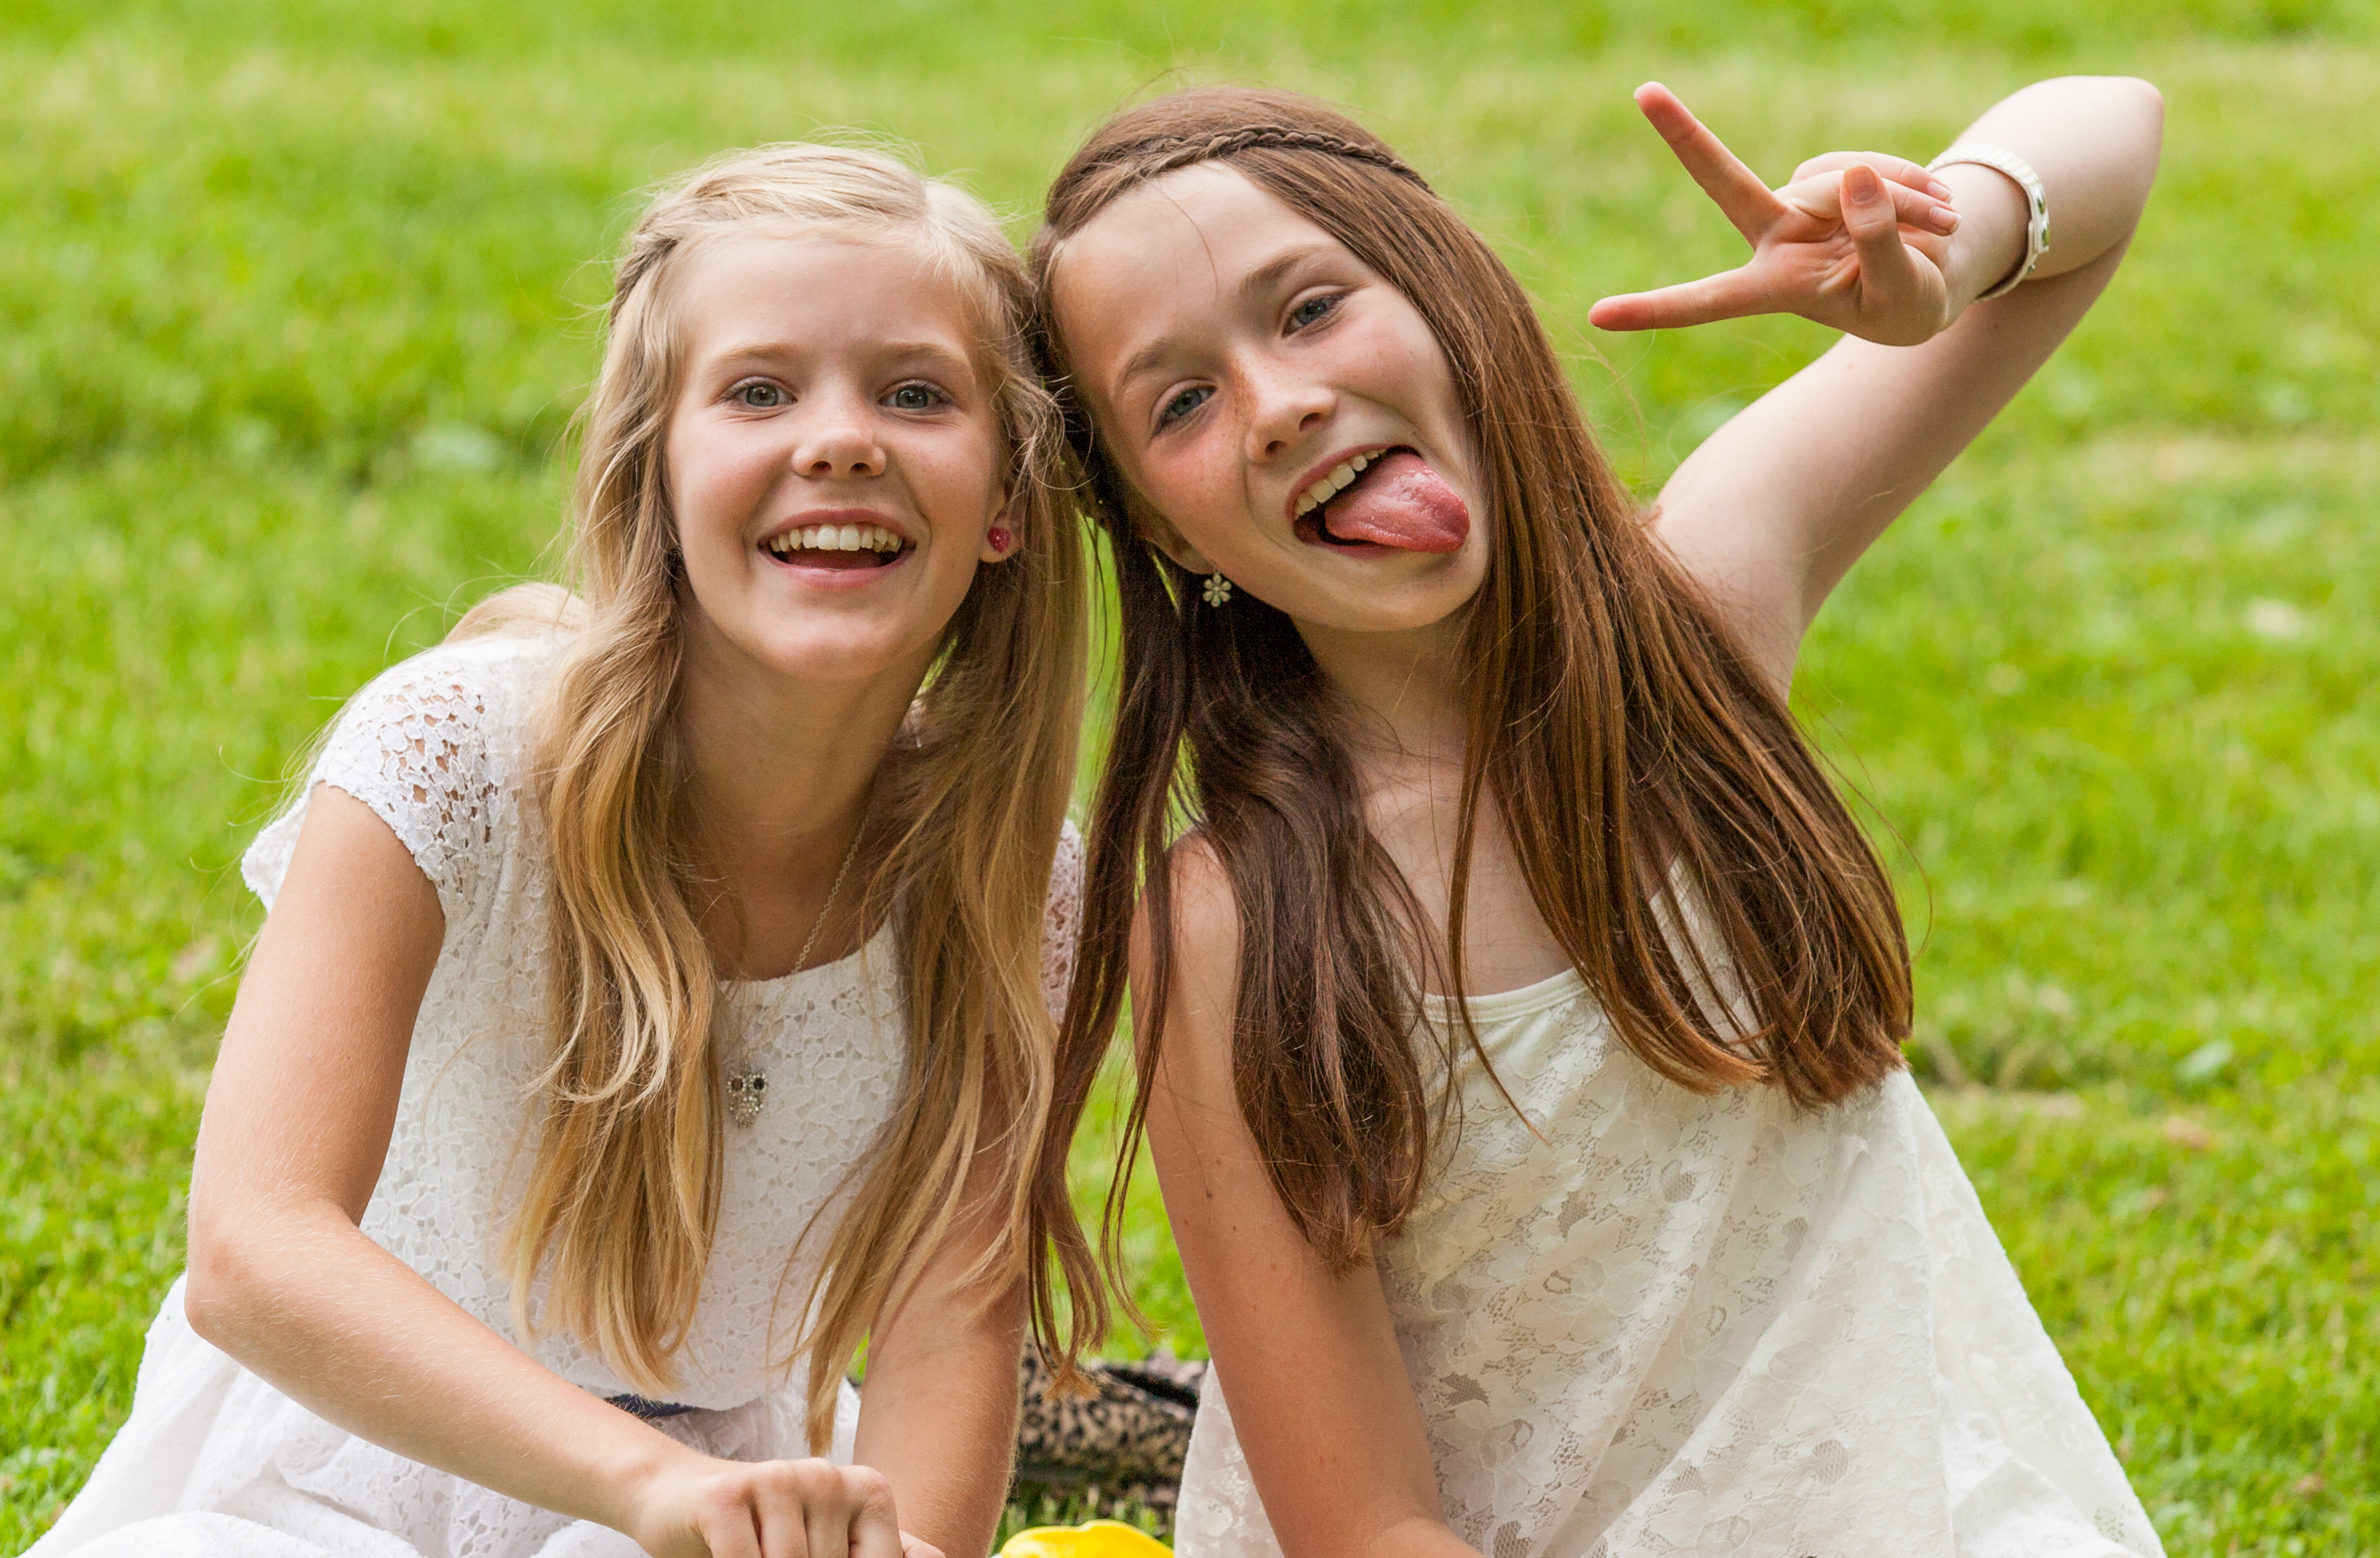 two cute girls in Sigtuna, Sweden in June 2014, picture 2 out 4